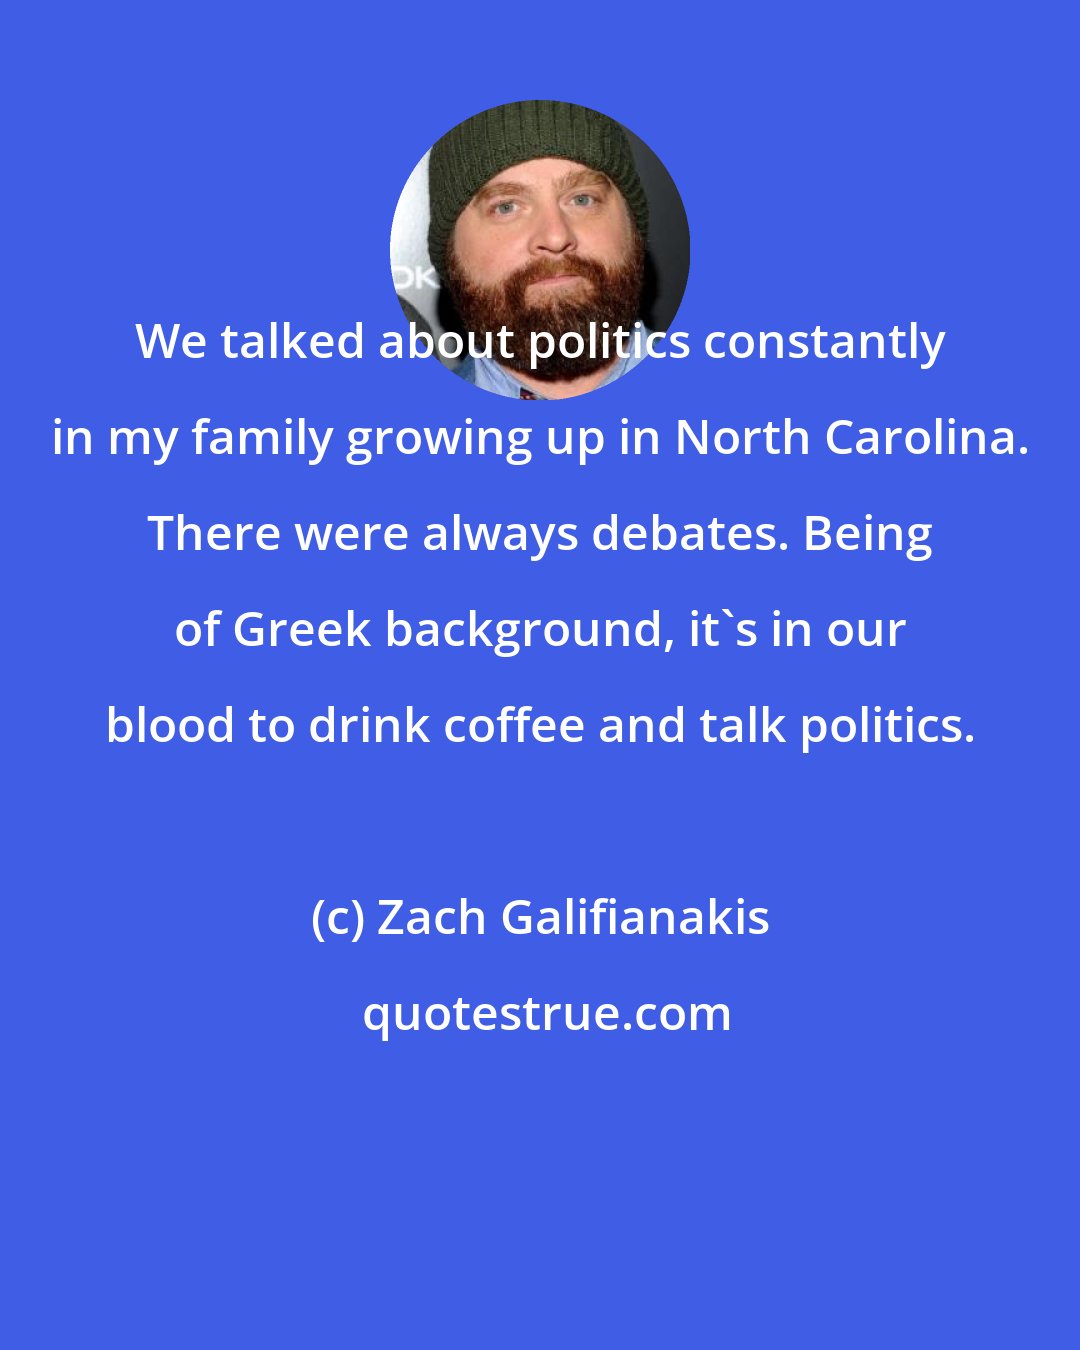 Zach Galifianakis: We talked about politics constantly in my family growing up in North Carolina. There were always debates. Being of Greek background, it's in our blood to drink coffee and talk politics.